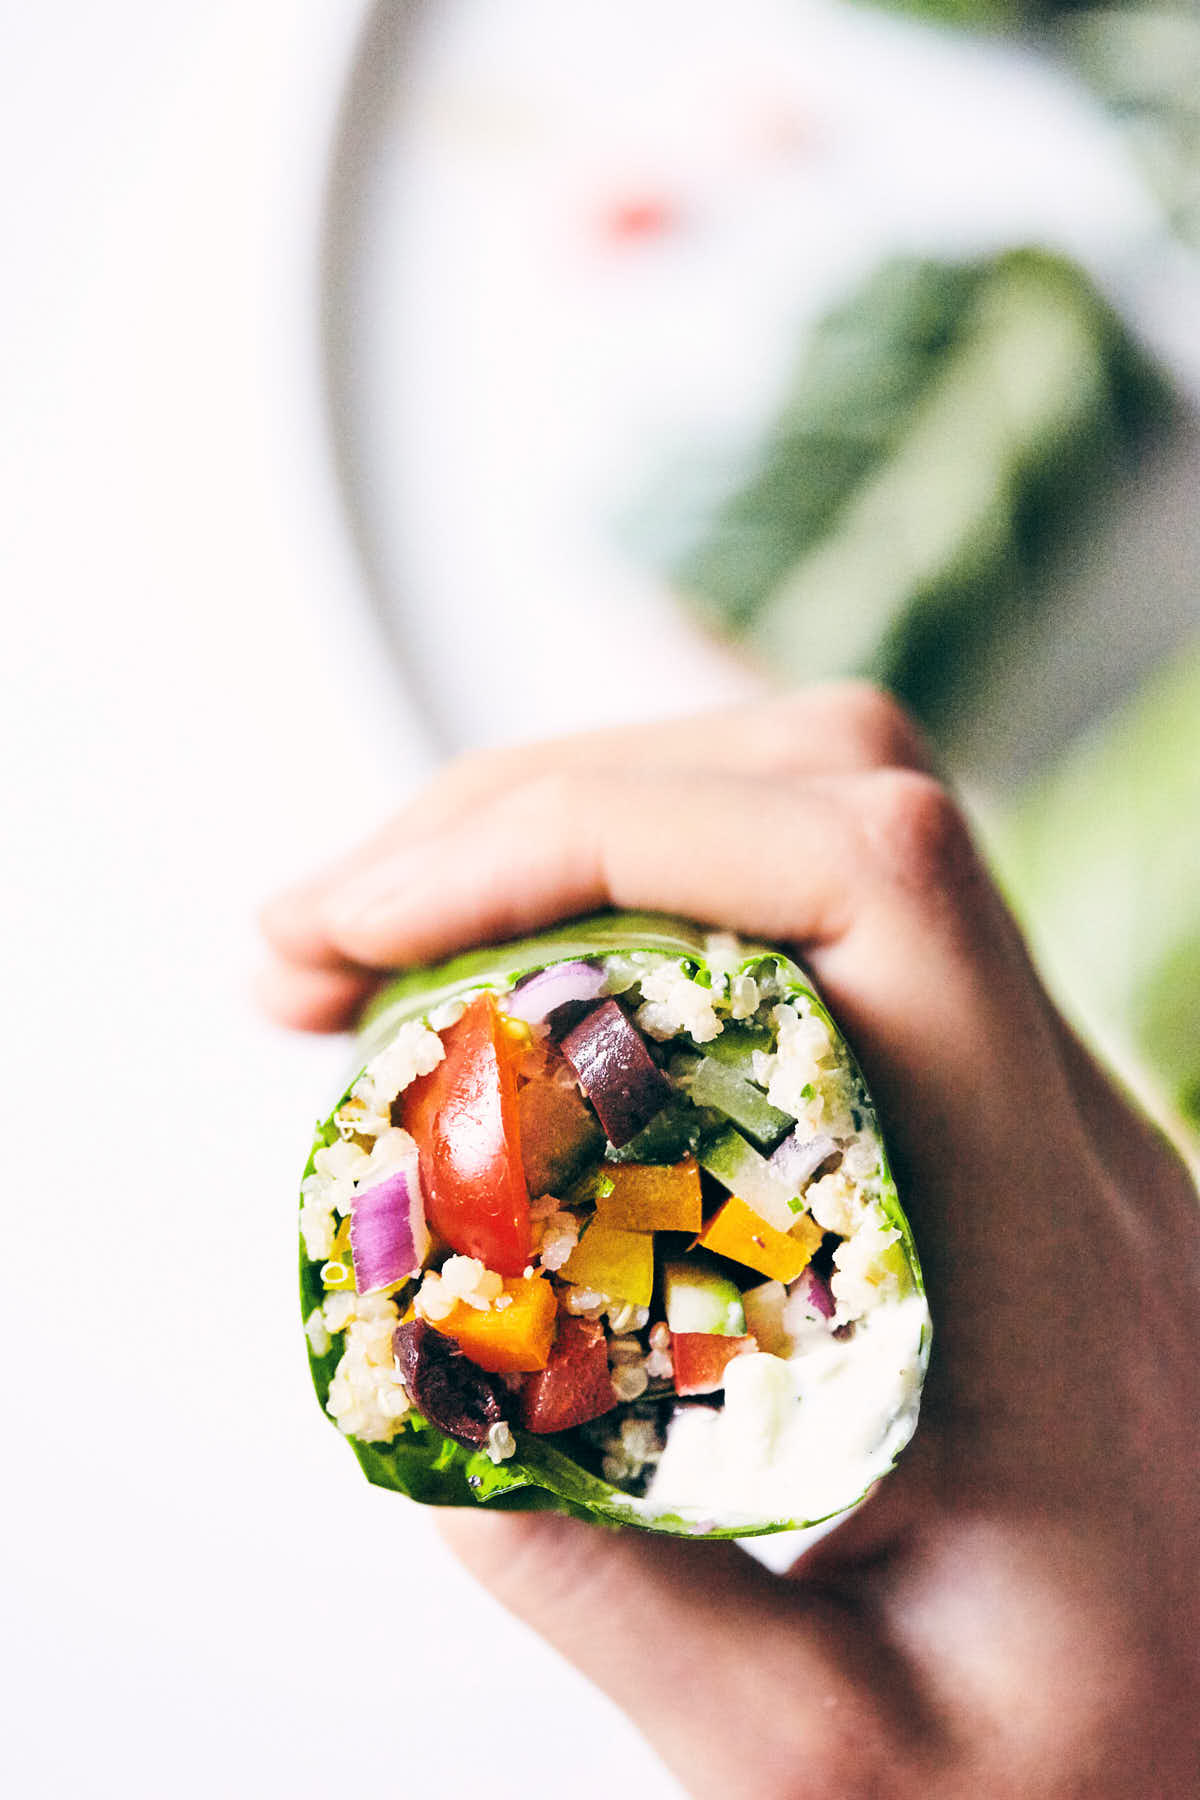 Hand holding green collard wrap sliced in half with peppers, tzatziki, cucumber, red onion and olives visible inside